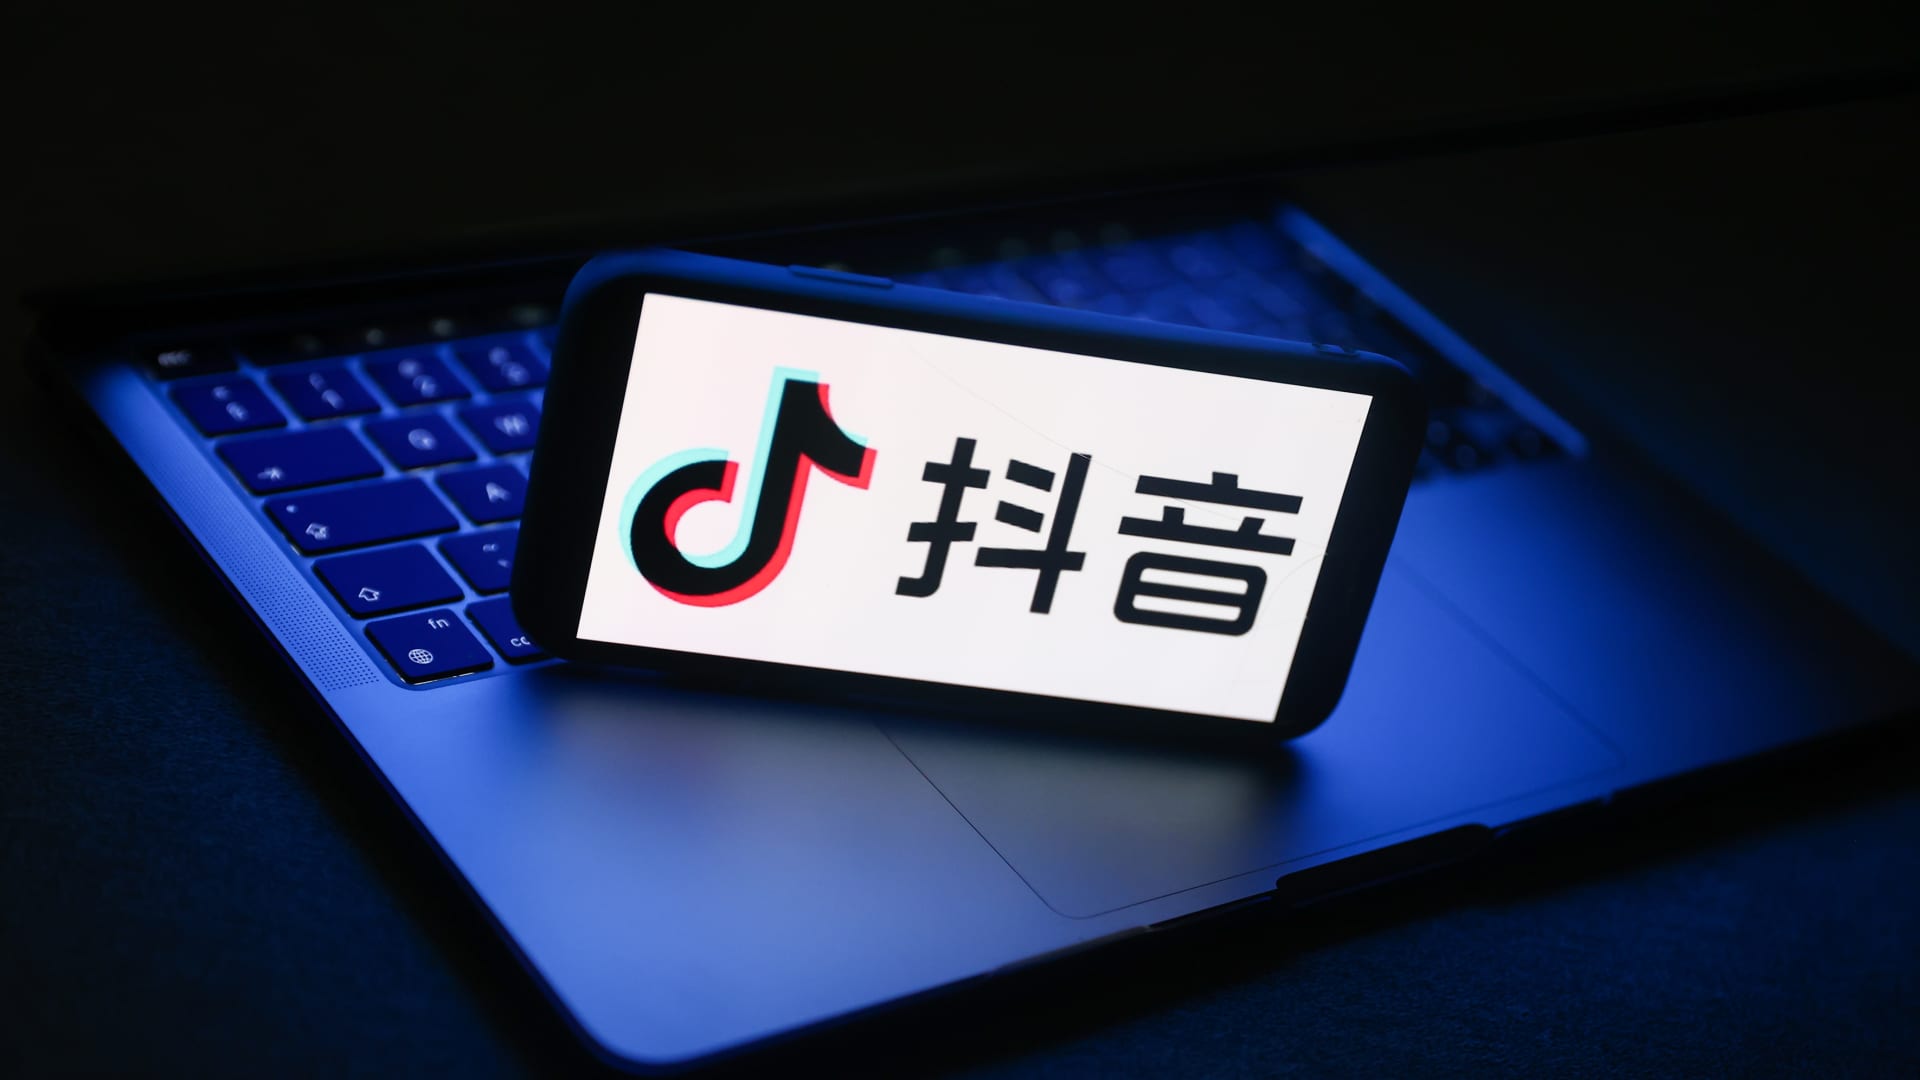 ByteDance is testing food delivery service via its Chinese version of TikTok